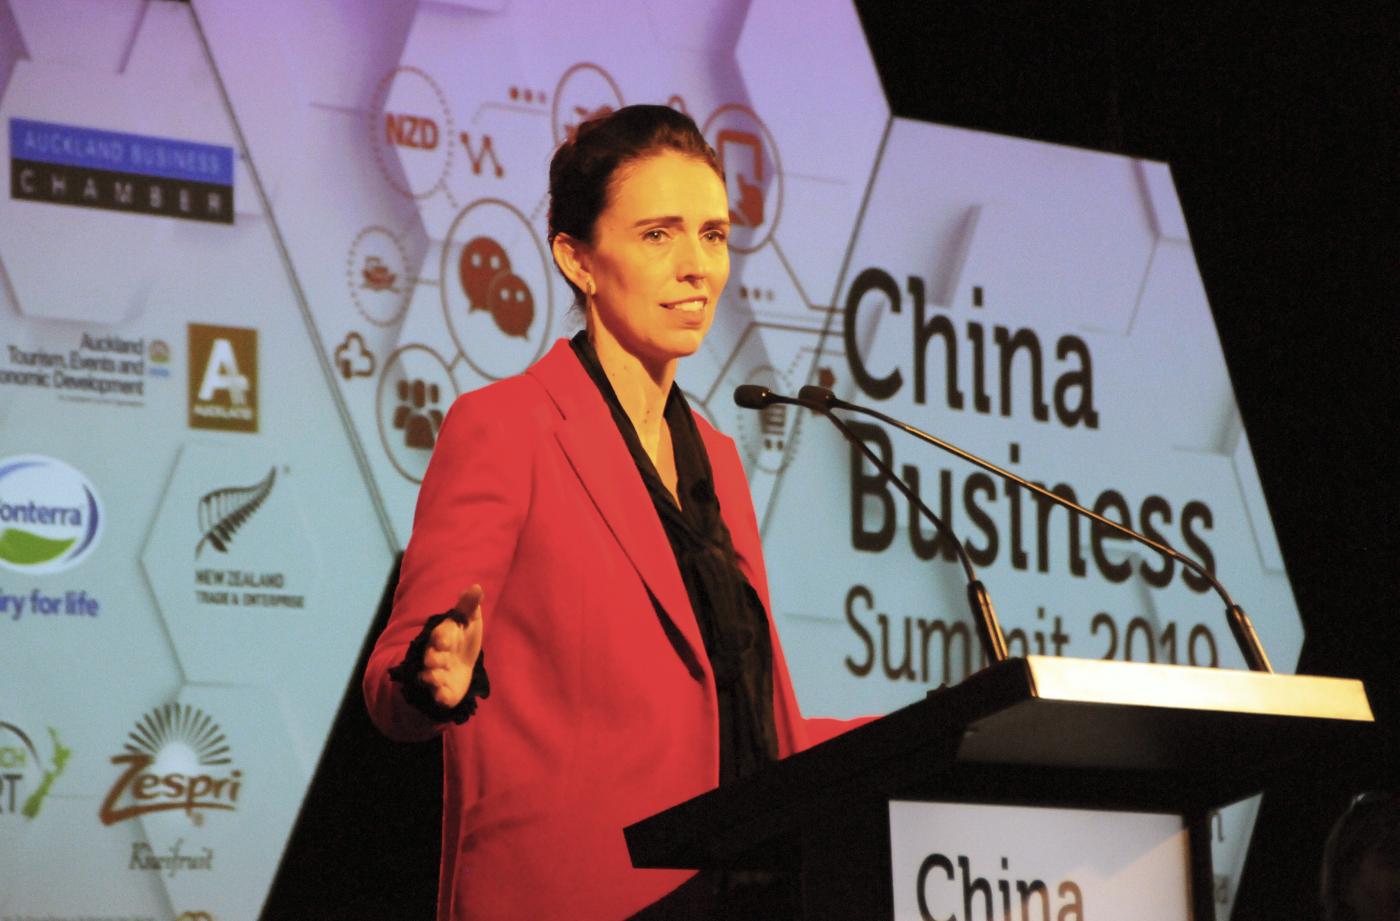 AUCKLAND, May 6, 2019 (Xinhua) -- New Zealand Prime Minister Jacinda Ardern speaks at the annual China Business Summit in Auckland, New Zealand, on May 6, 2019. New Zealand Prime Minister Jacinda Ardern reiterated on Monday the importance of New Zealand-China relations and the mutual respect and trust when dealing with disputes. (Xinhua/Lu Huaiqian/IANS) by .